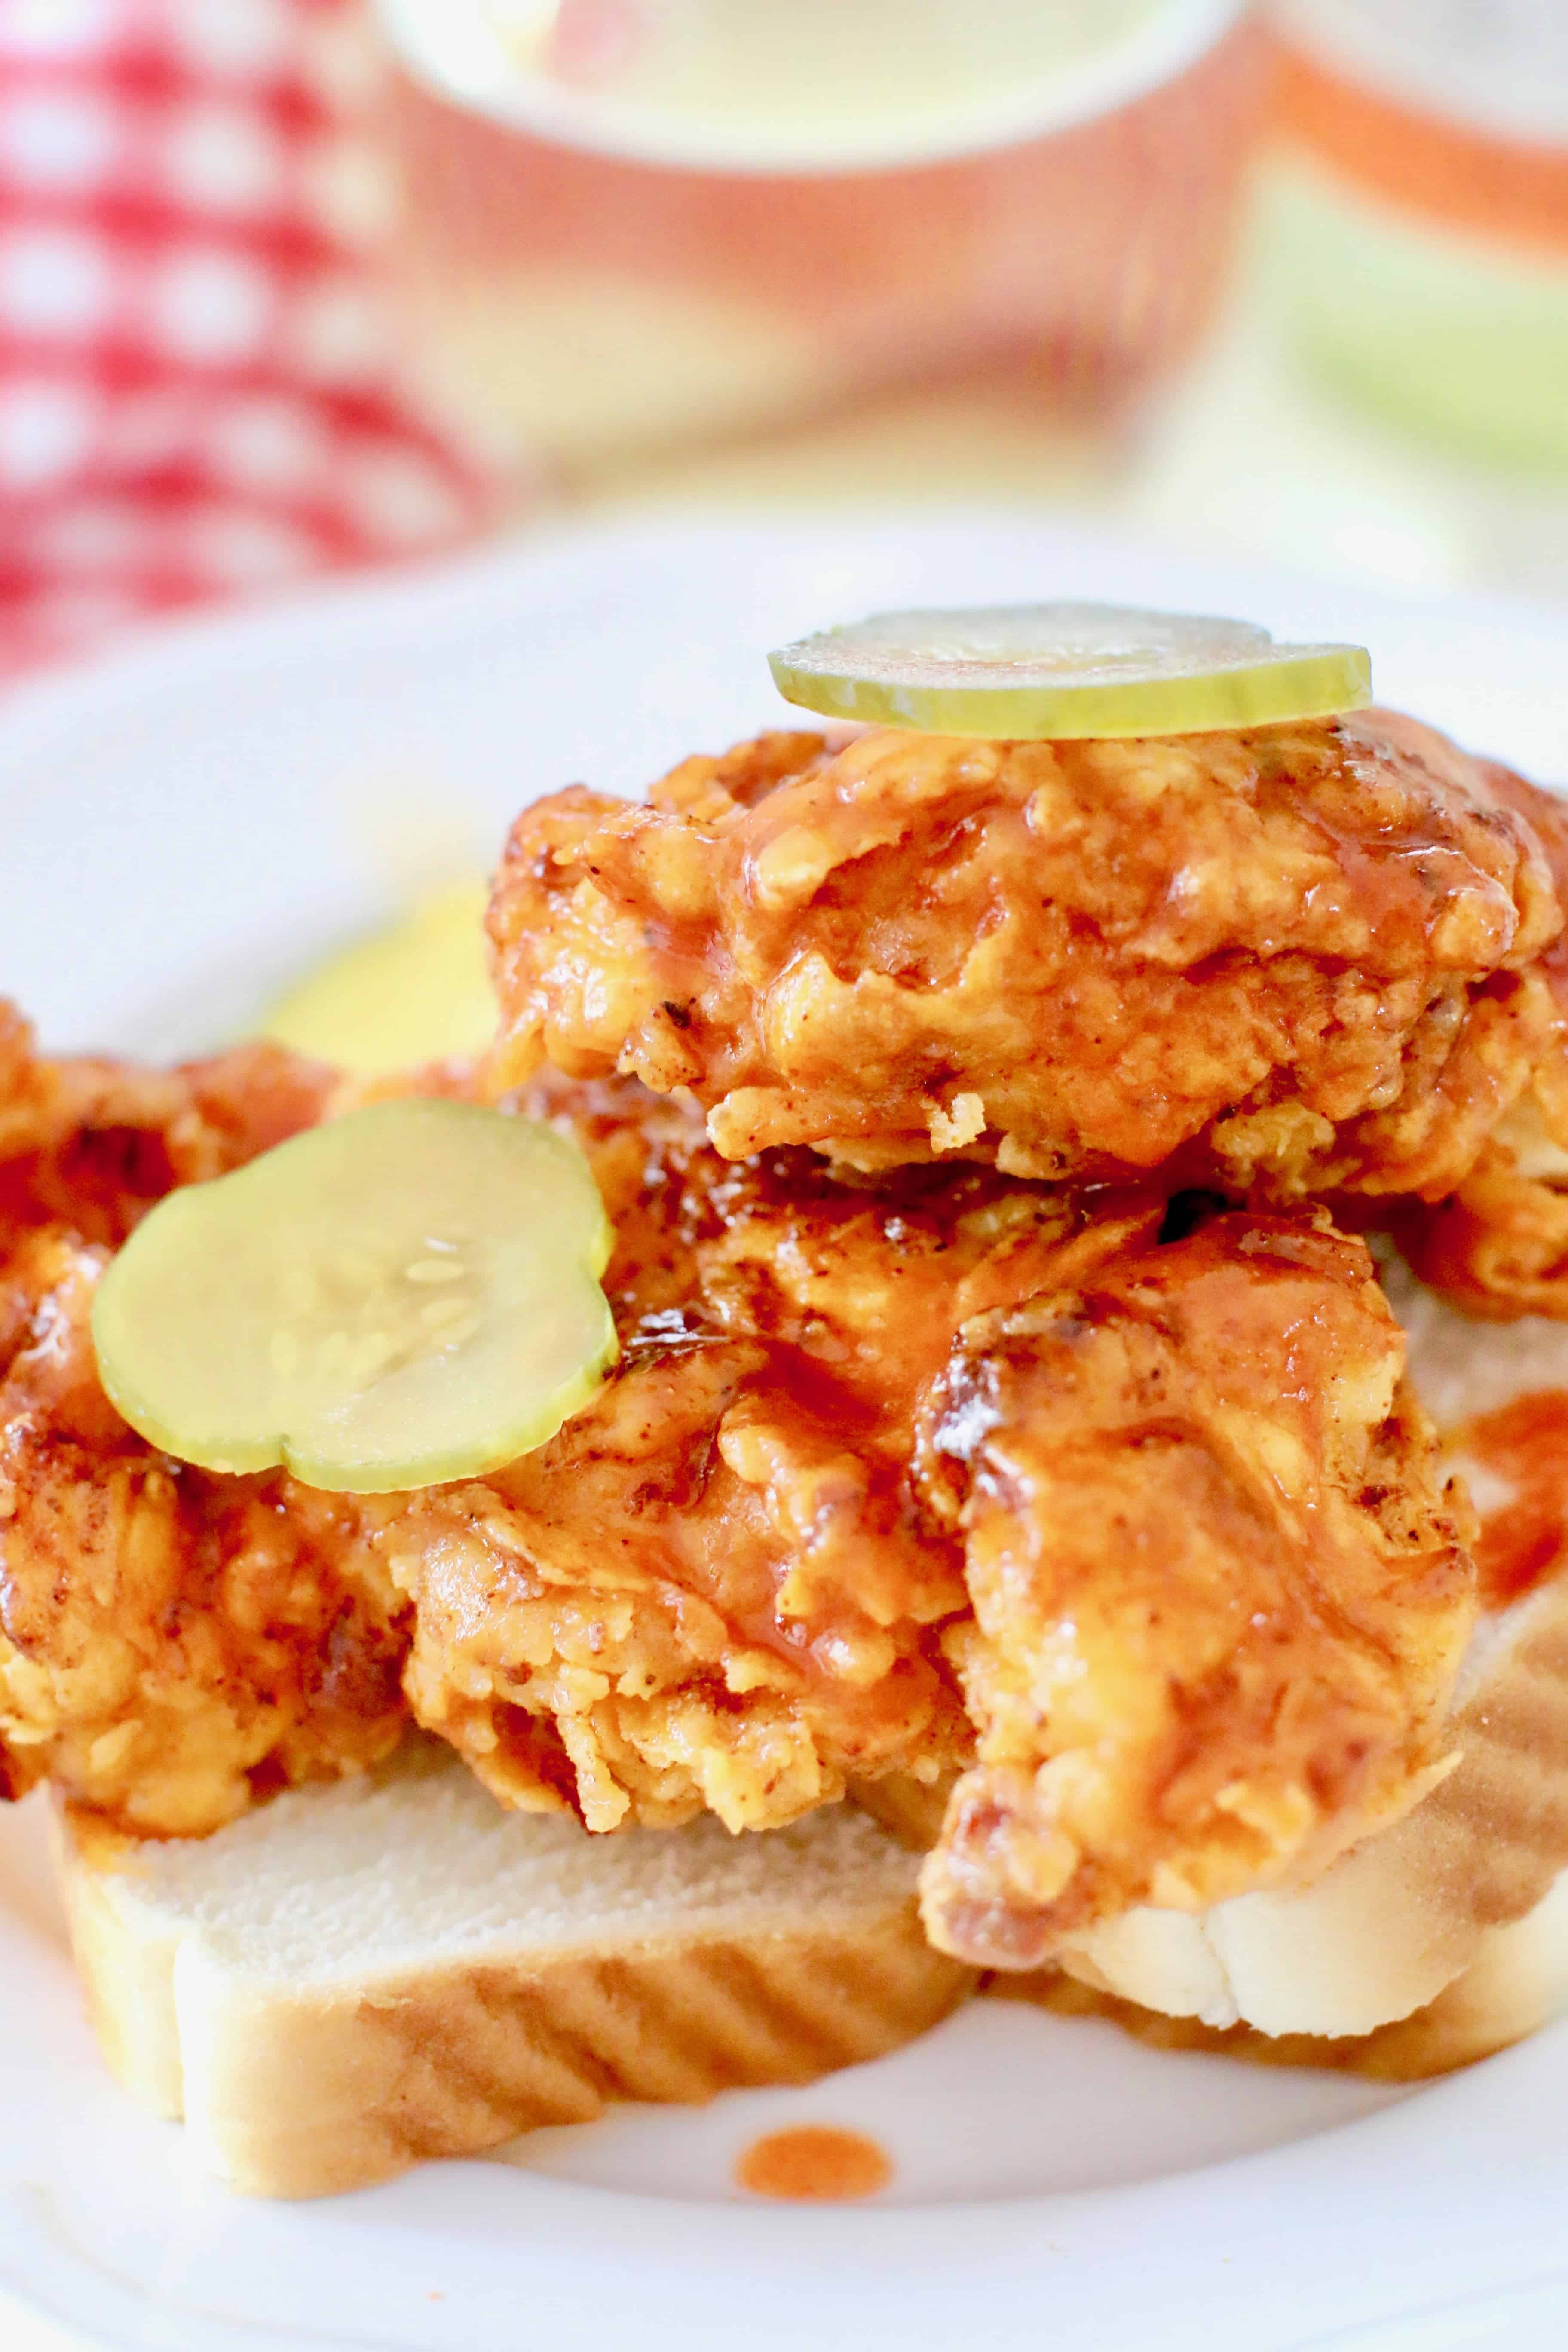 Nashville Fried Hot Chickenpieces on slices of white bread with sliced pickles on top.